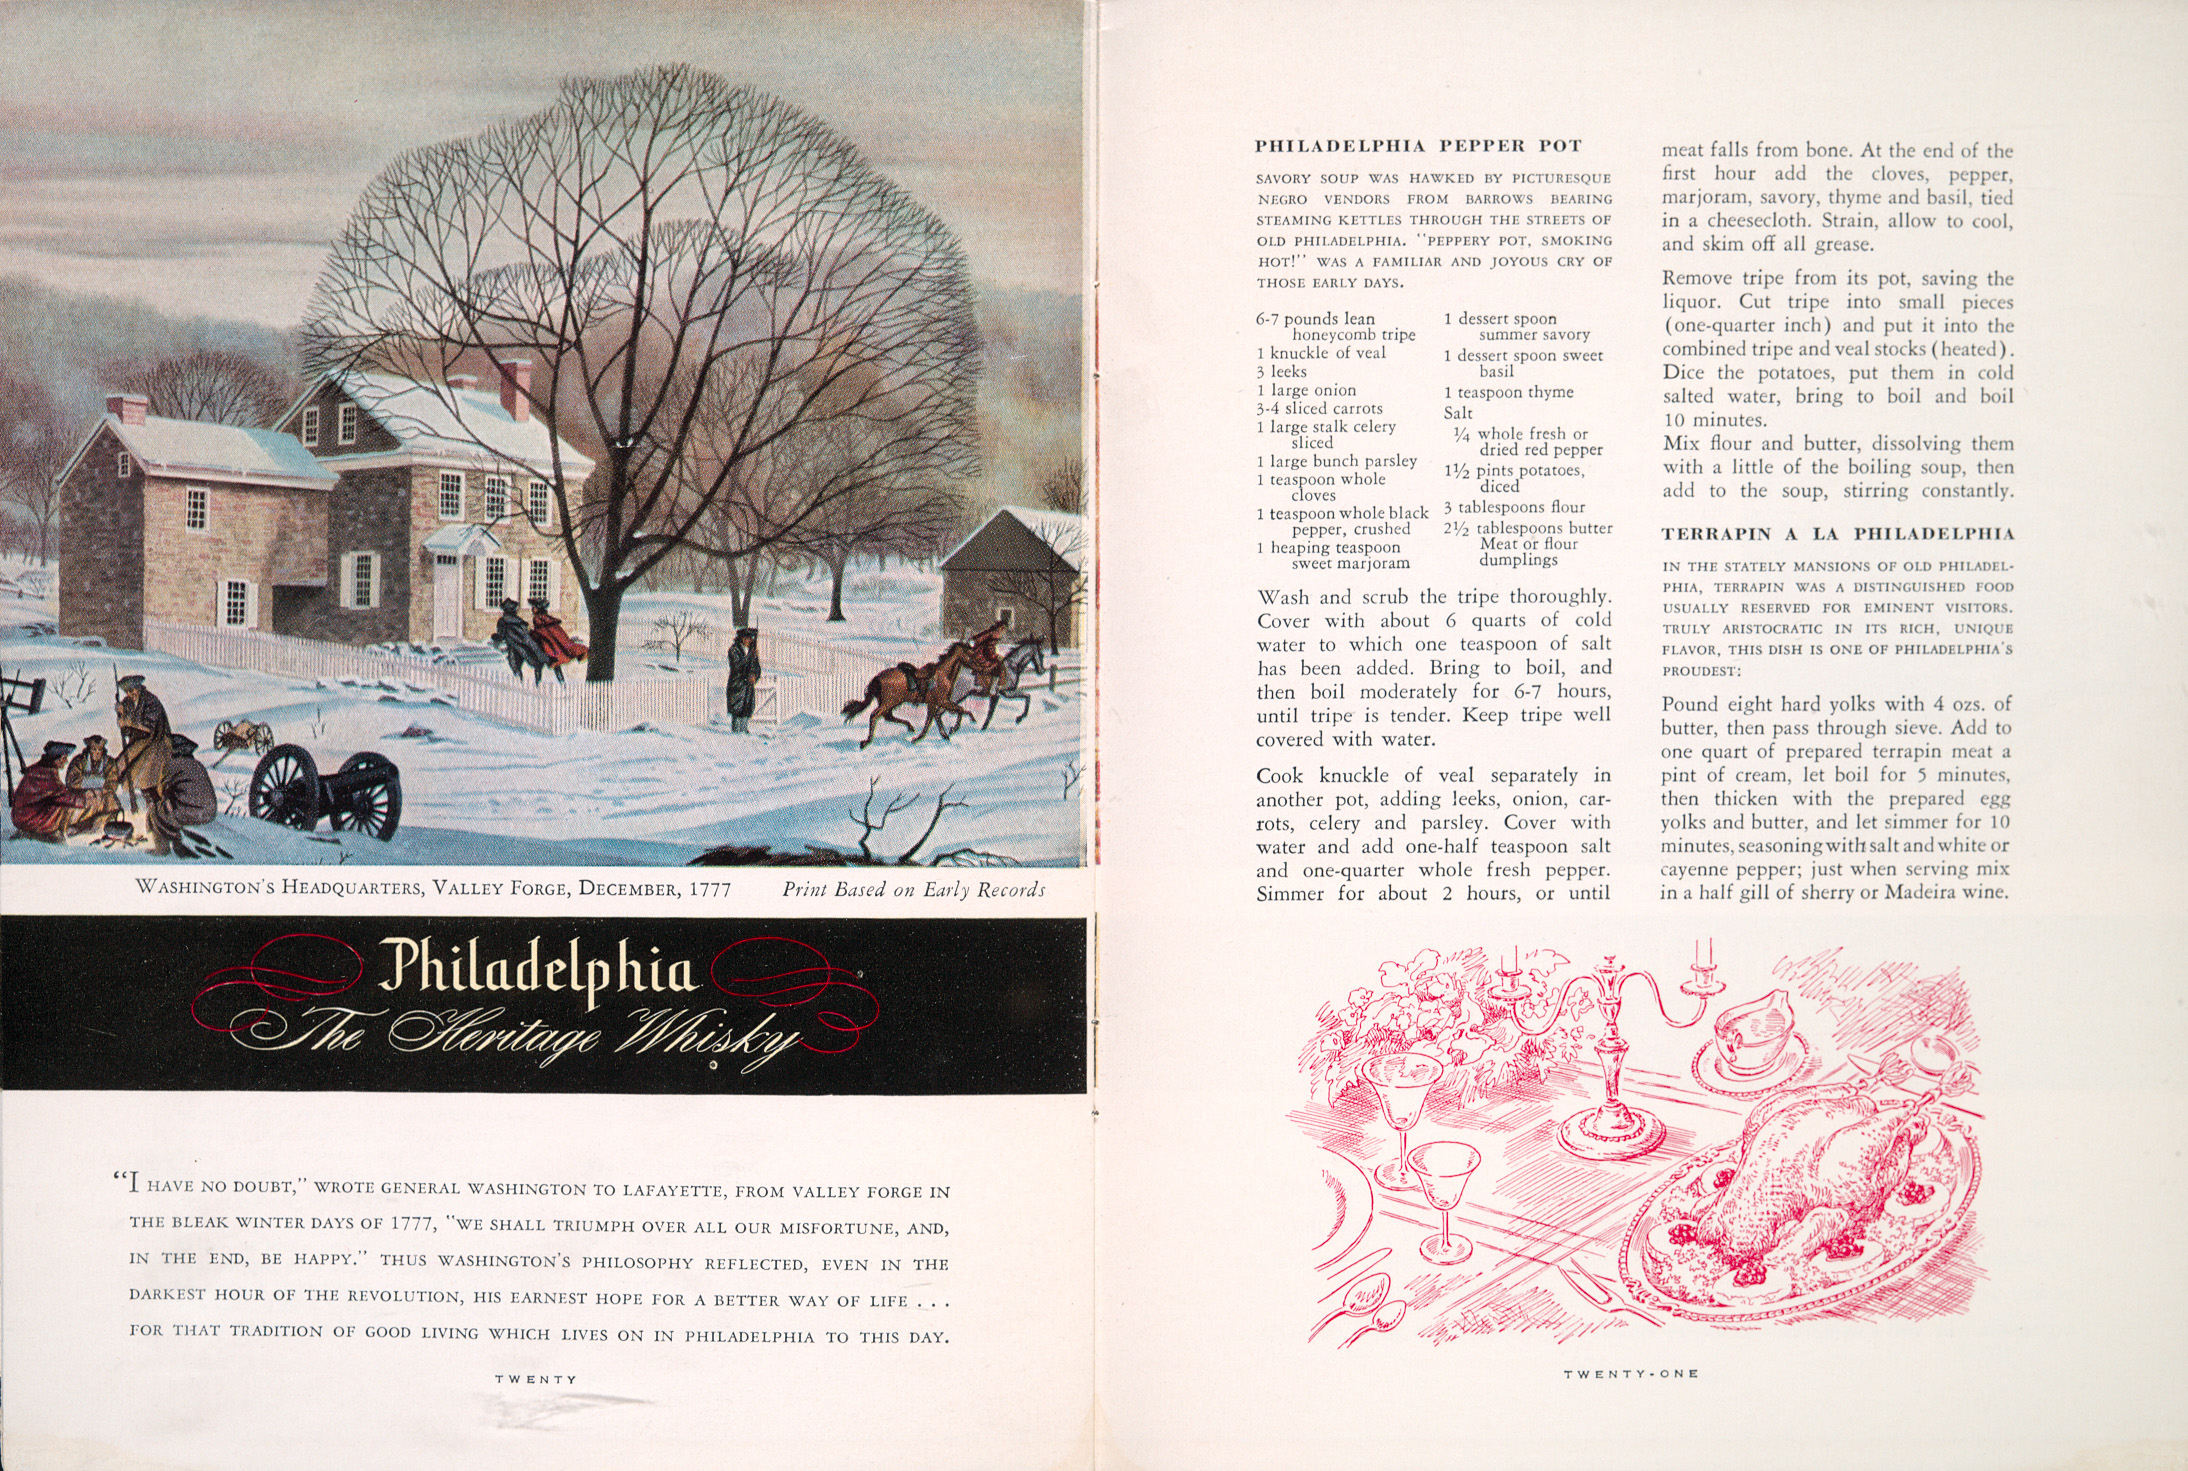 p 20-21 from Famous Recipes in the Philadelphia Manner.